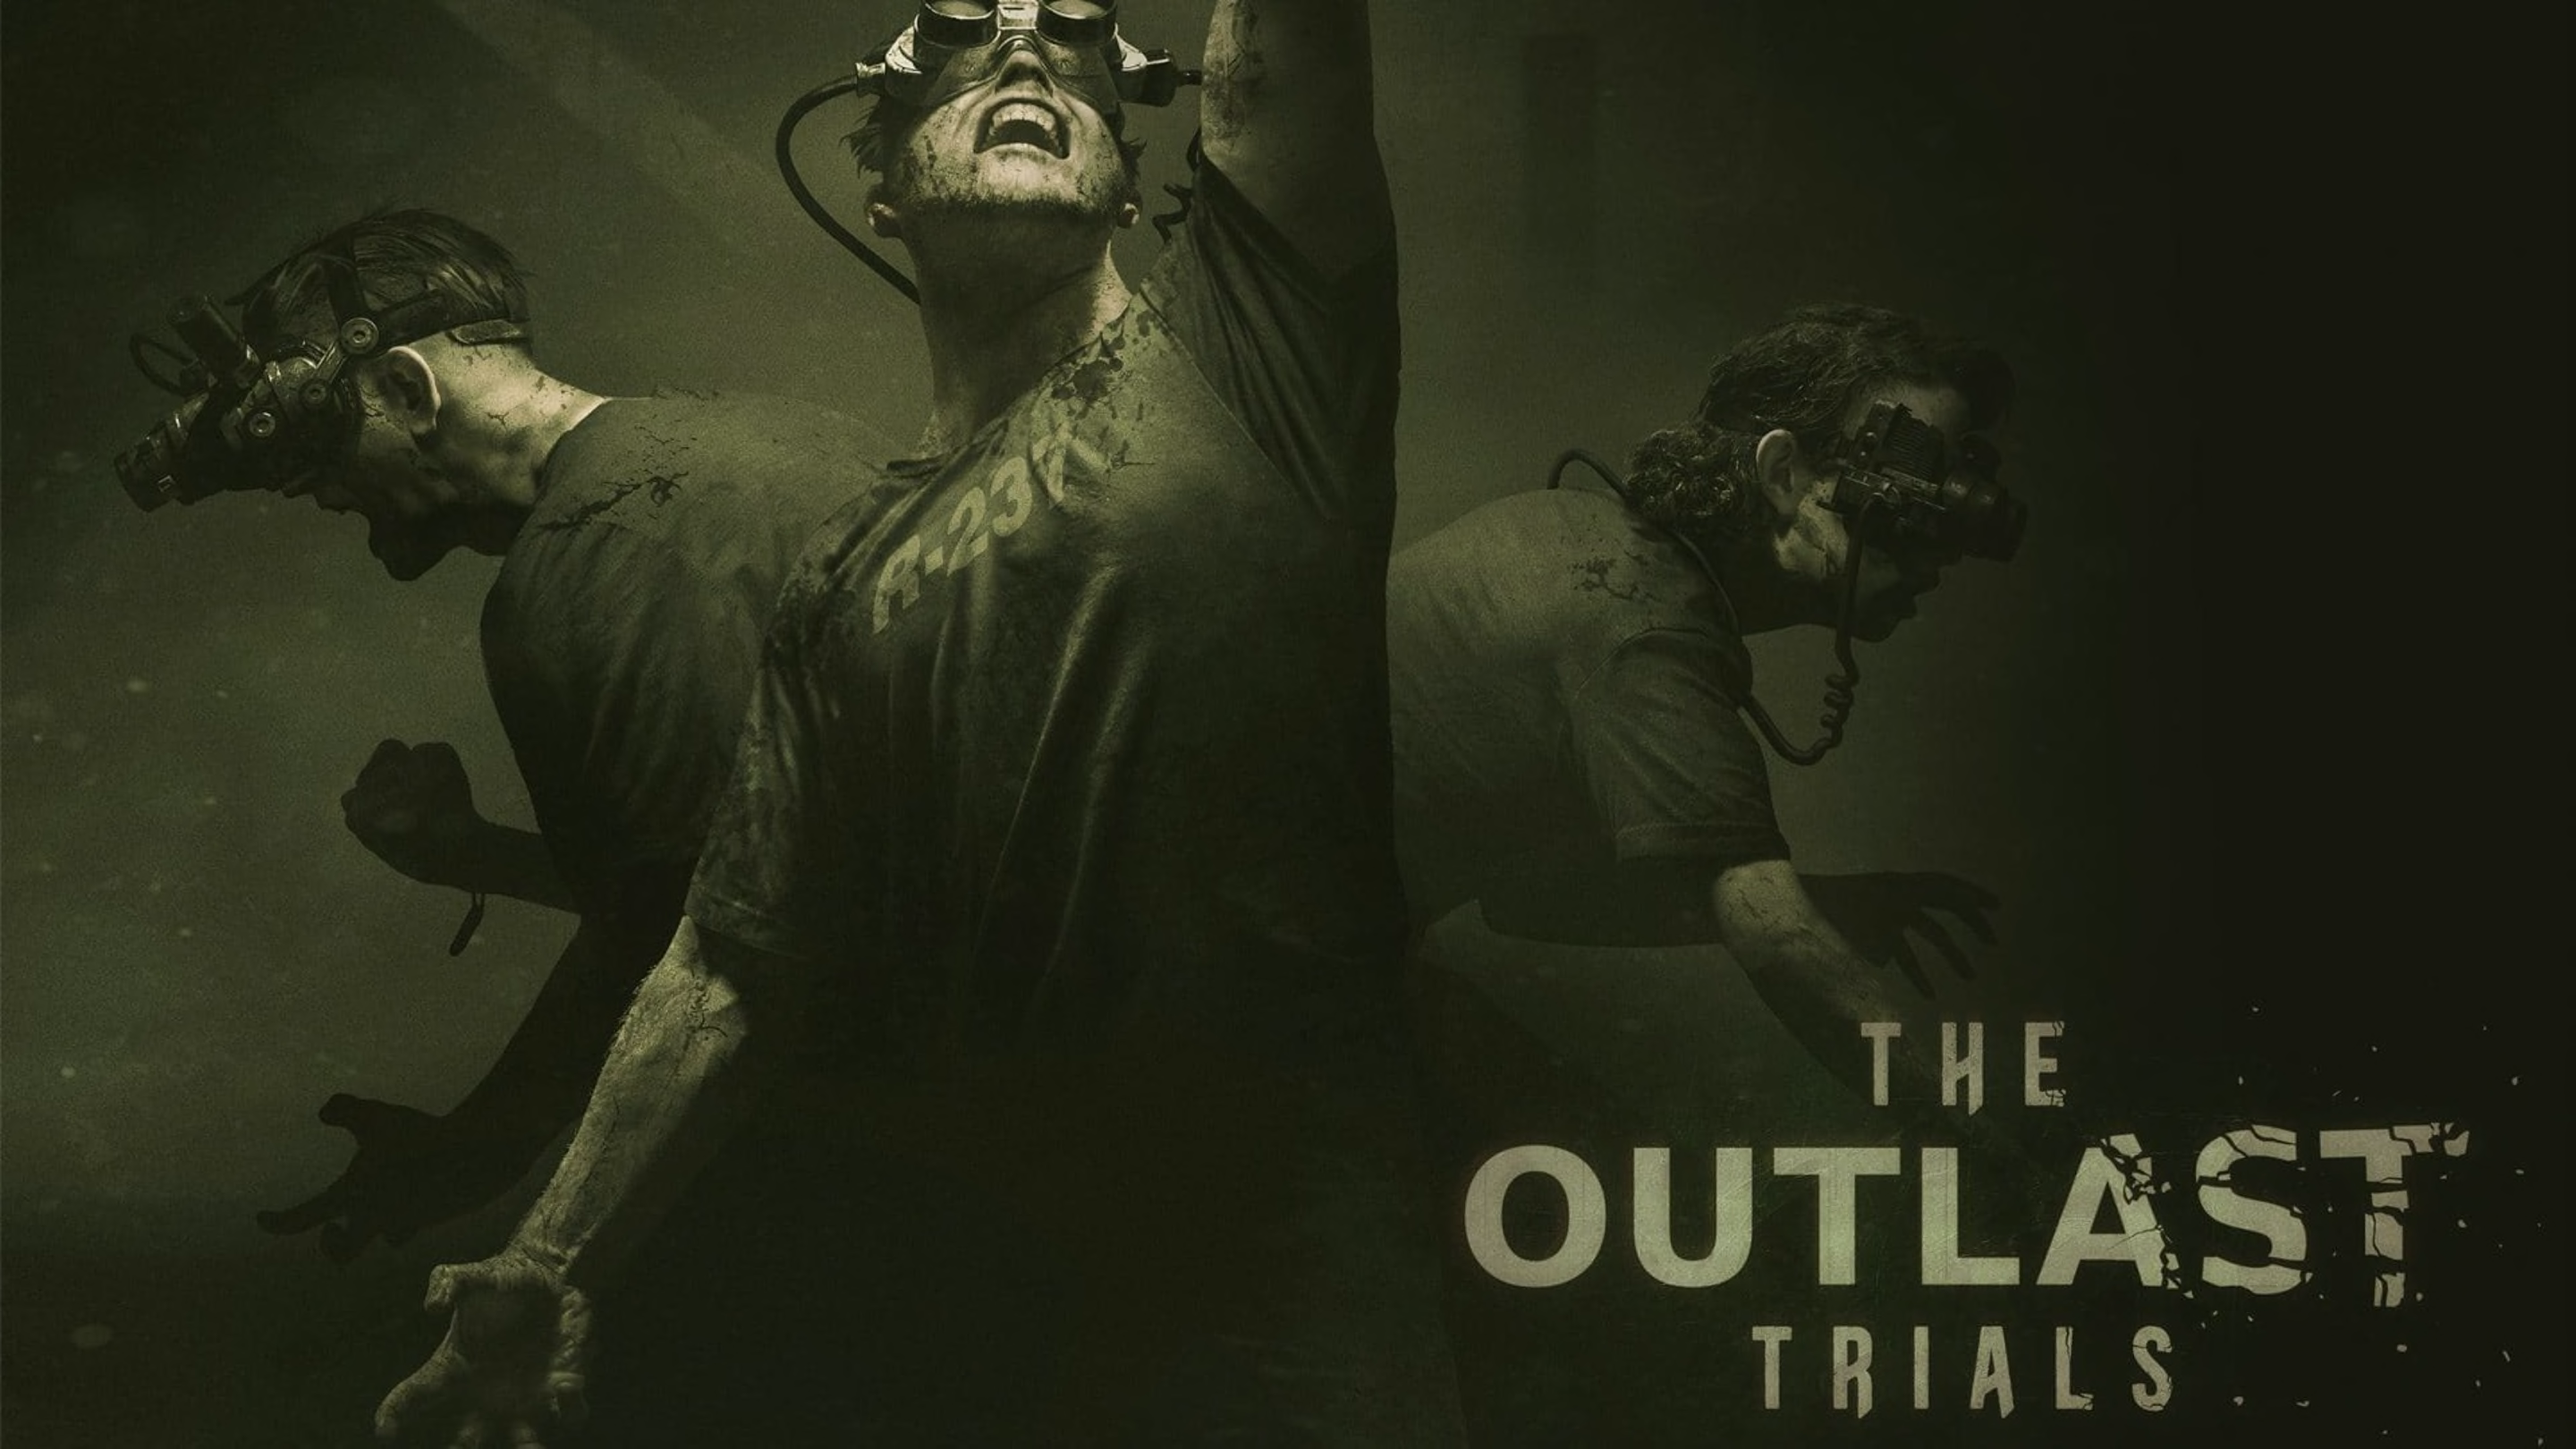 The Outlast Trials Closed Beta Dates Revealed Alongside First Look Trailer  - Gamescom Opening Night Live - IGN